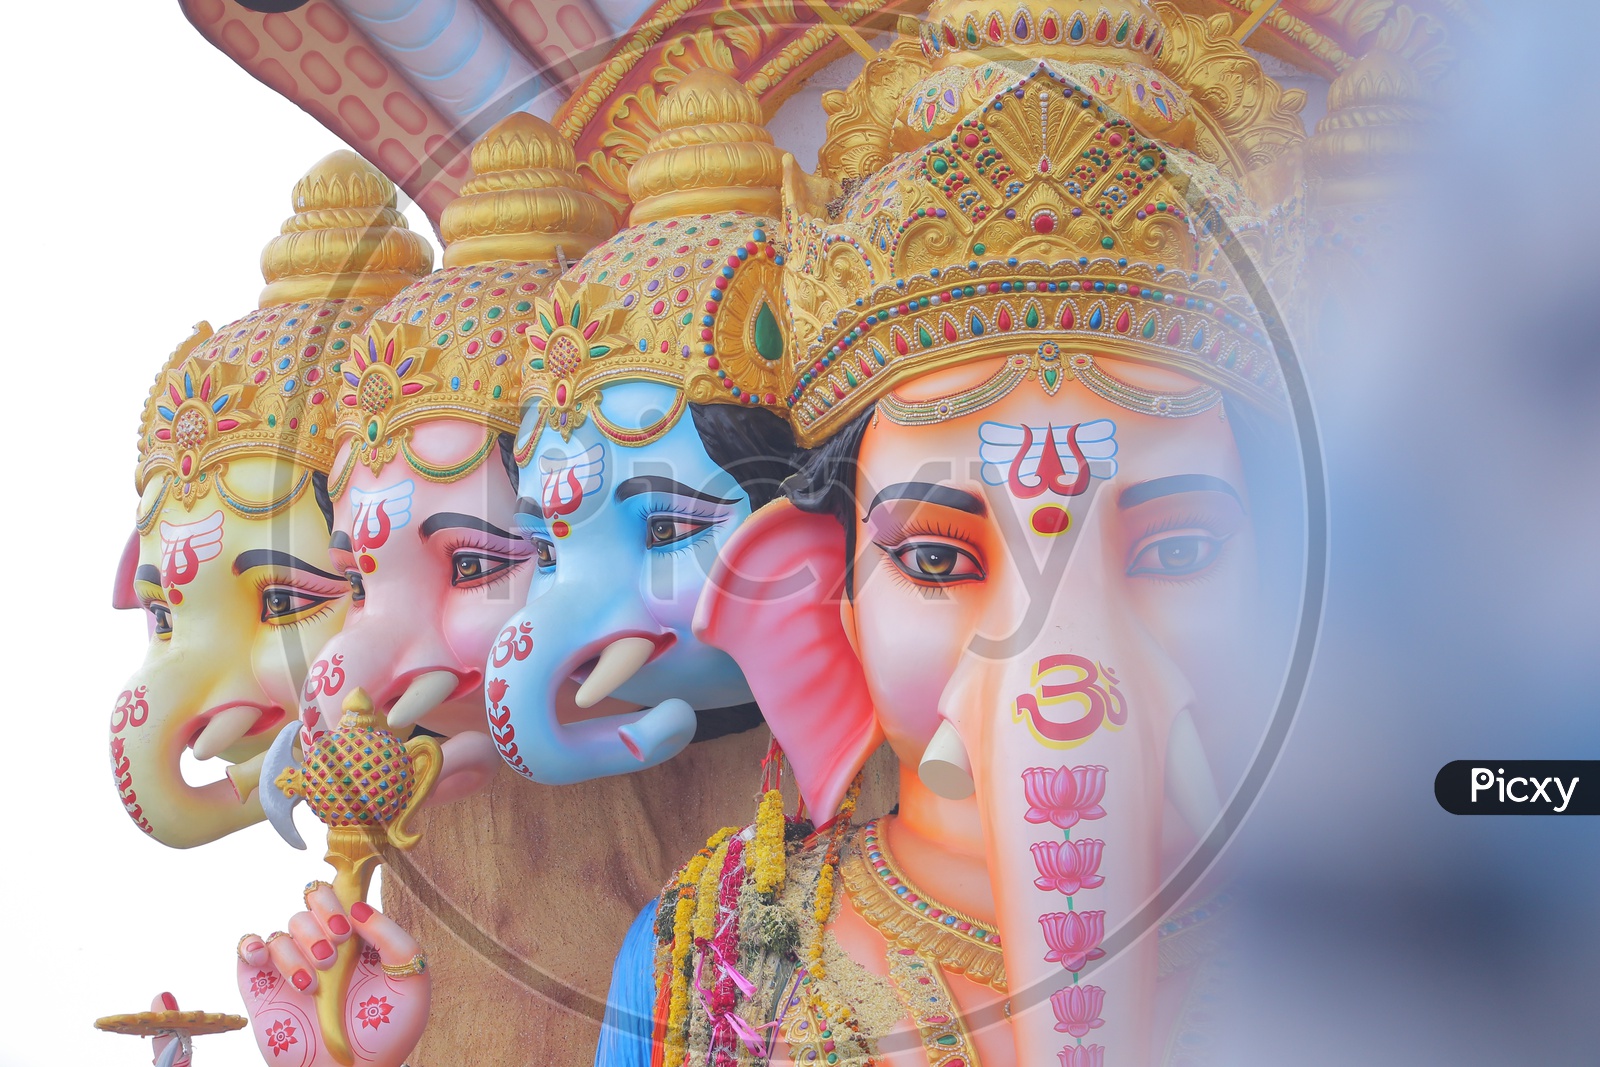 Ganesh Idol with many faces